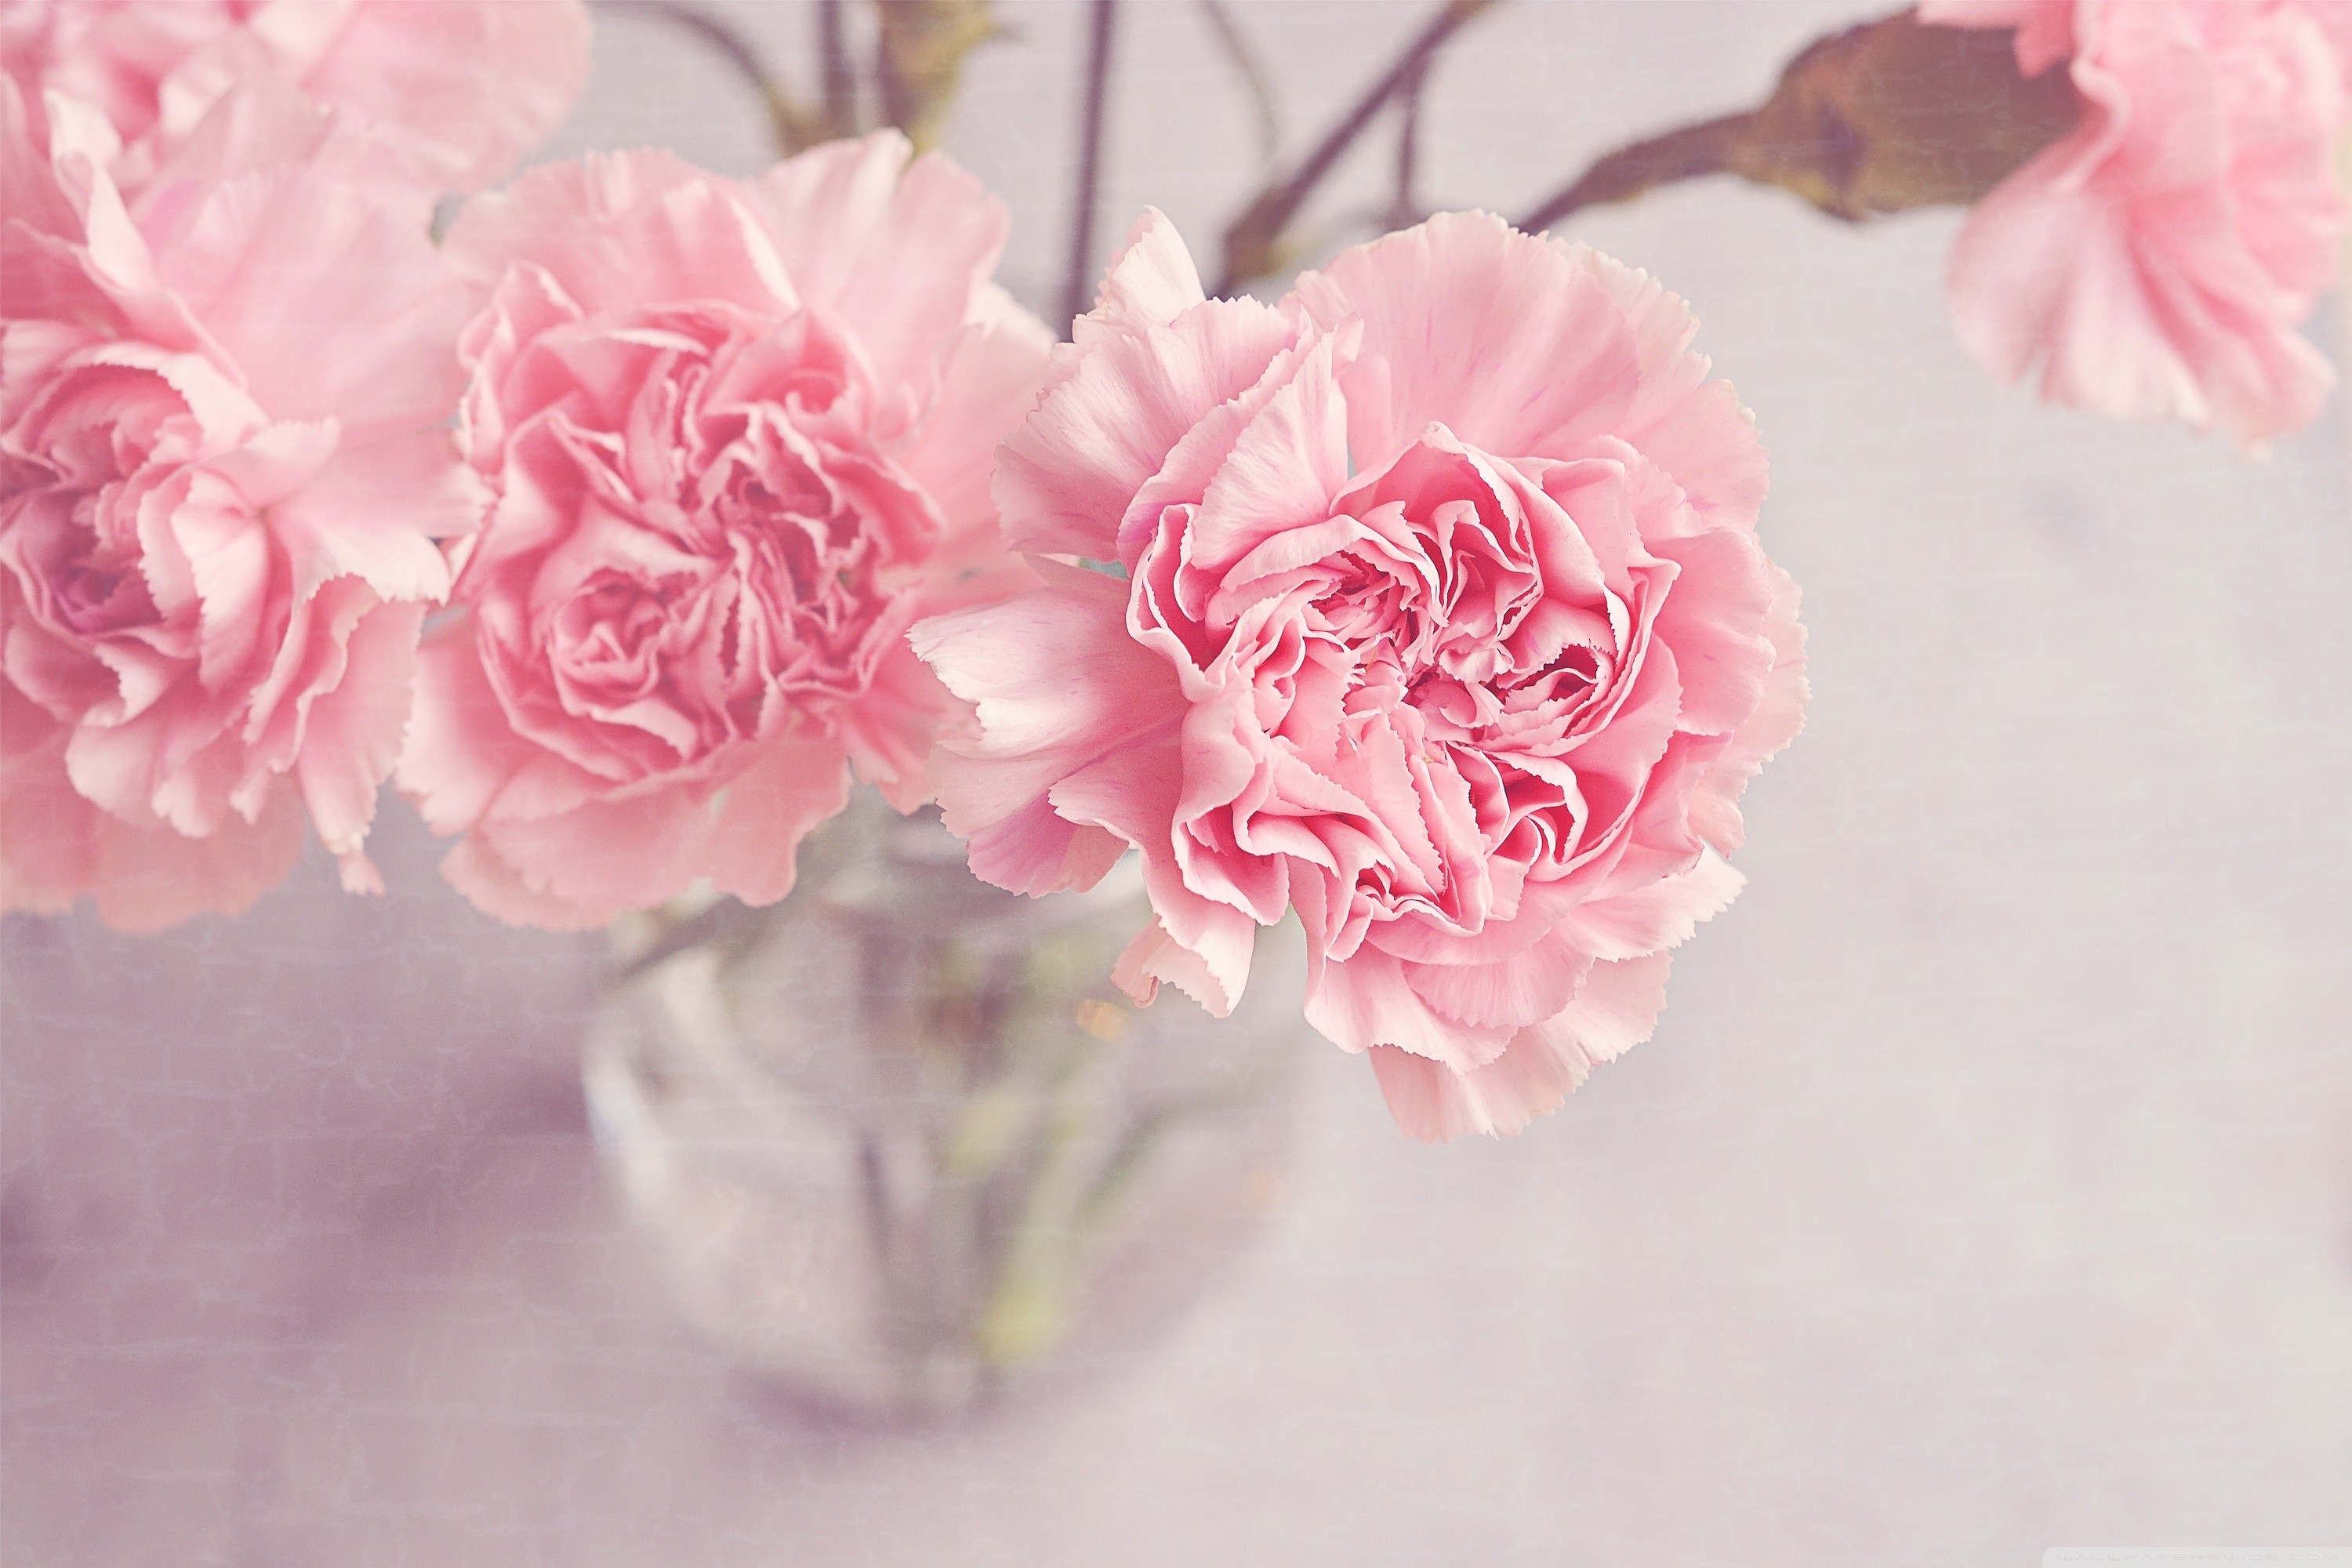 3000x2000 Light Pink Carnations Flowers in a Vase HD Wide Wallpaper for Widescreen